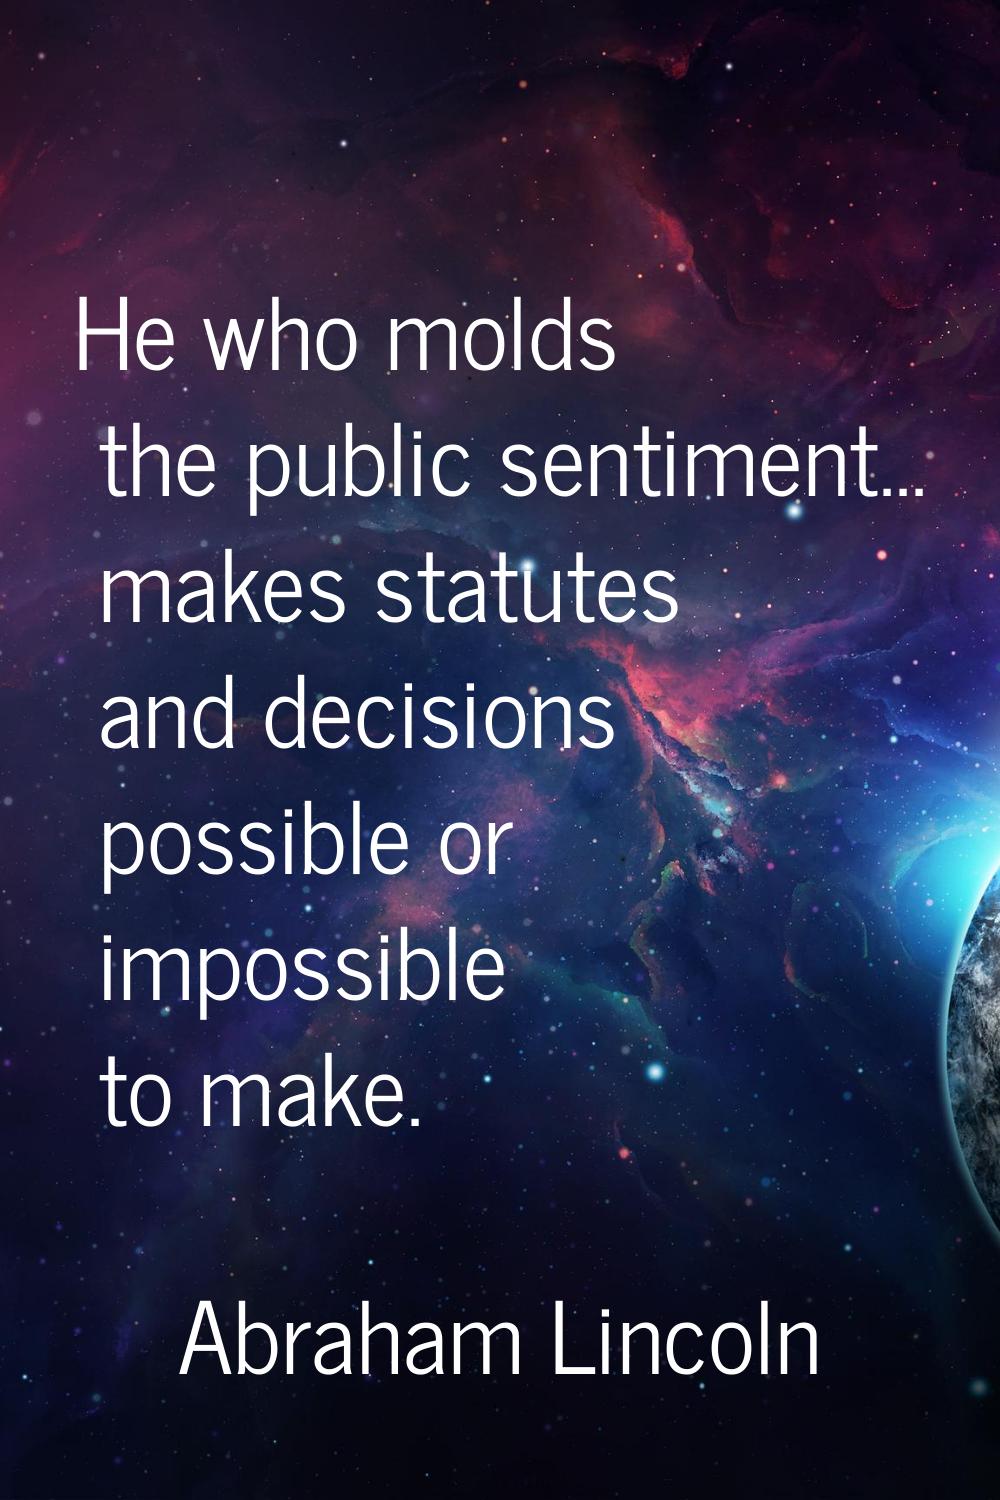 He who molds the public sentiment... makes statutes and decisions possible or impossible to make.